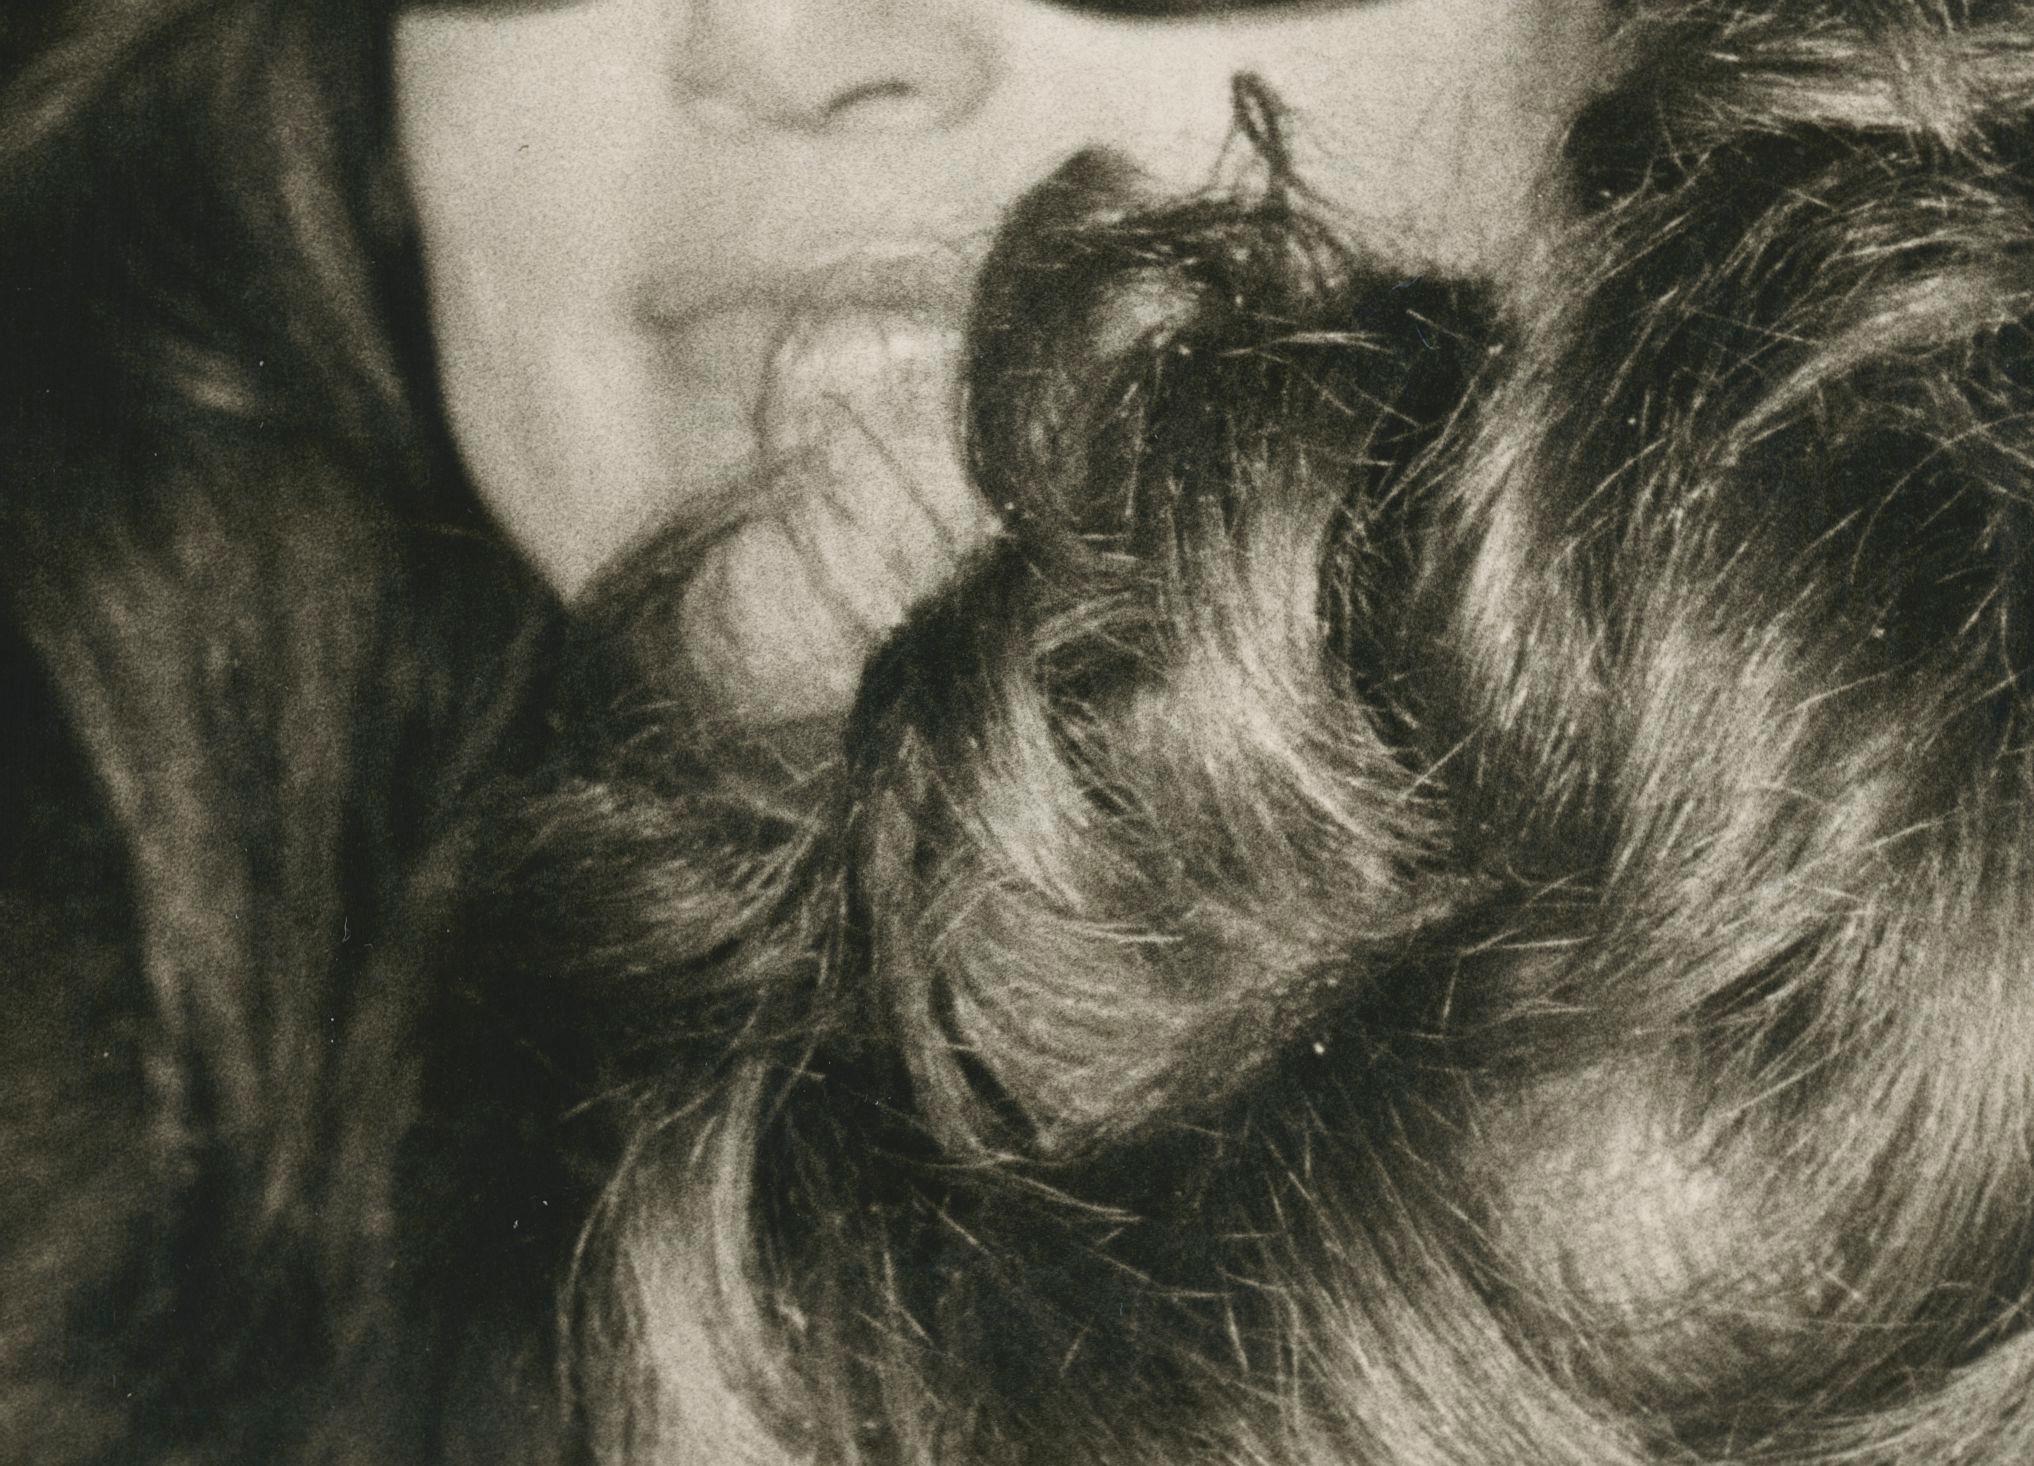 Jackie Kennedy with Sunglasses, Black and White; Paris, 1970s, 29, 7 x 20, 1 cm - Photograph by Tony Grylla